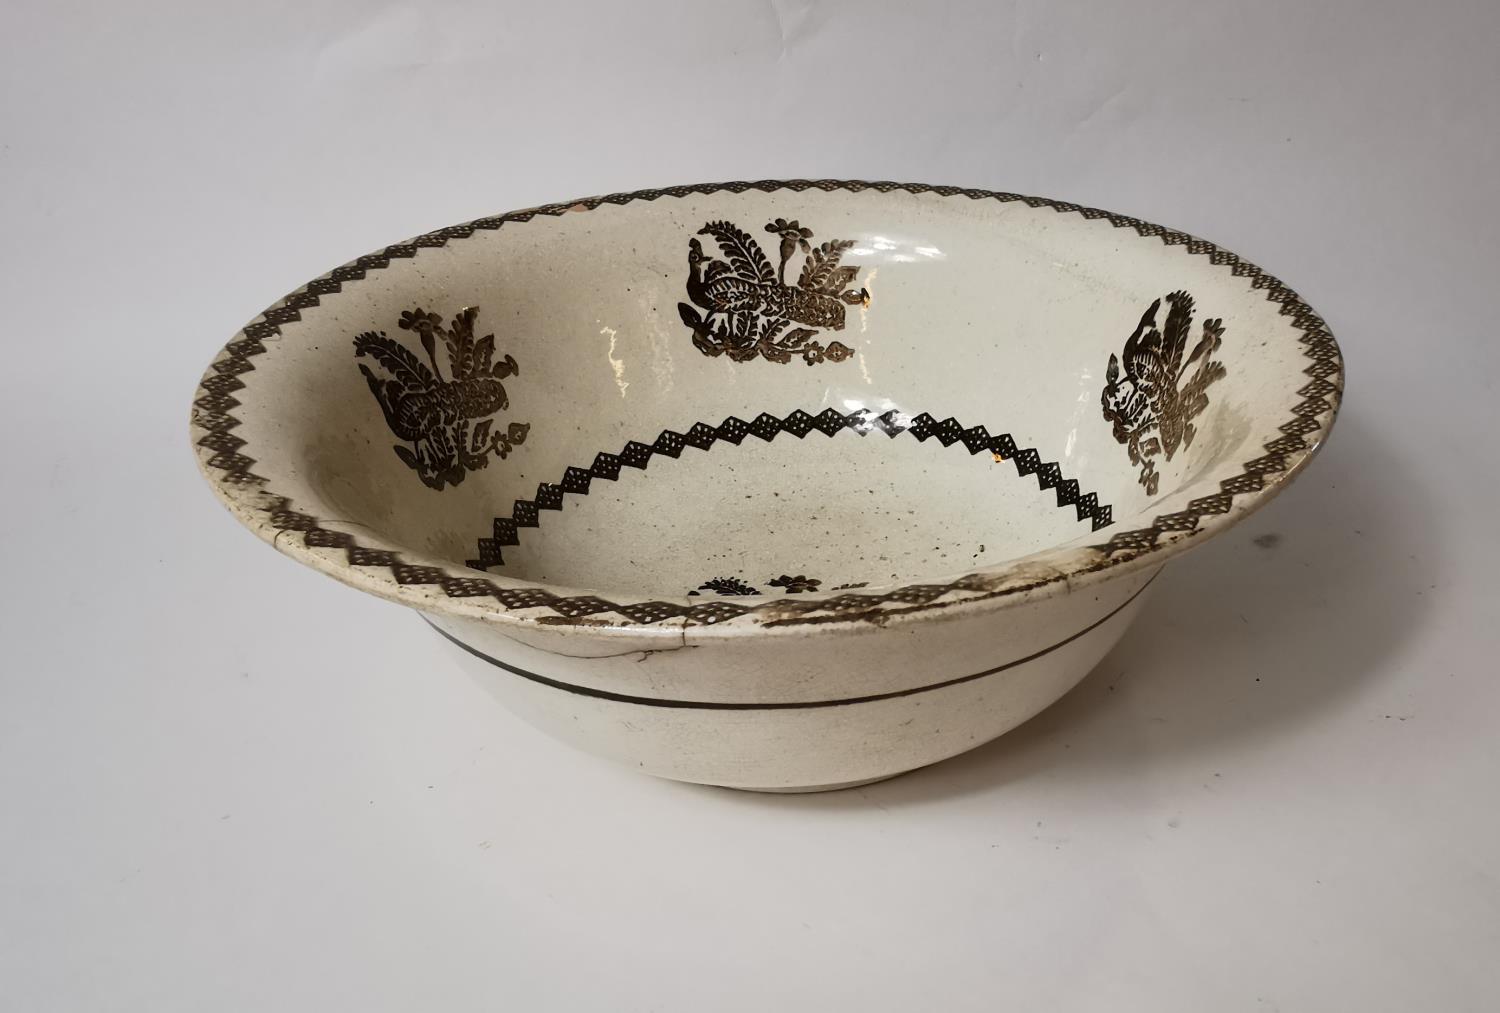 19th. C. brown and white spongeware bowl. - Image 2 of 2